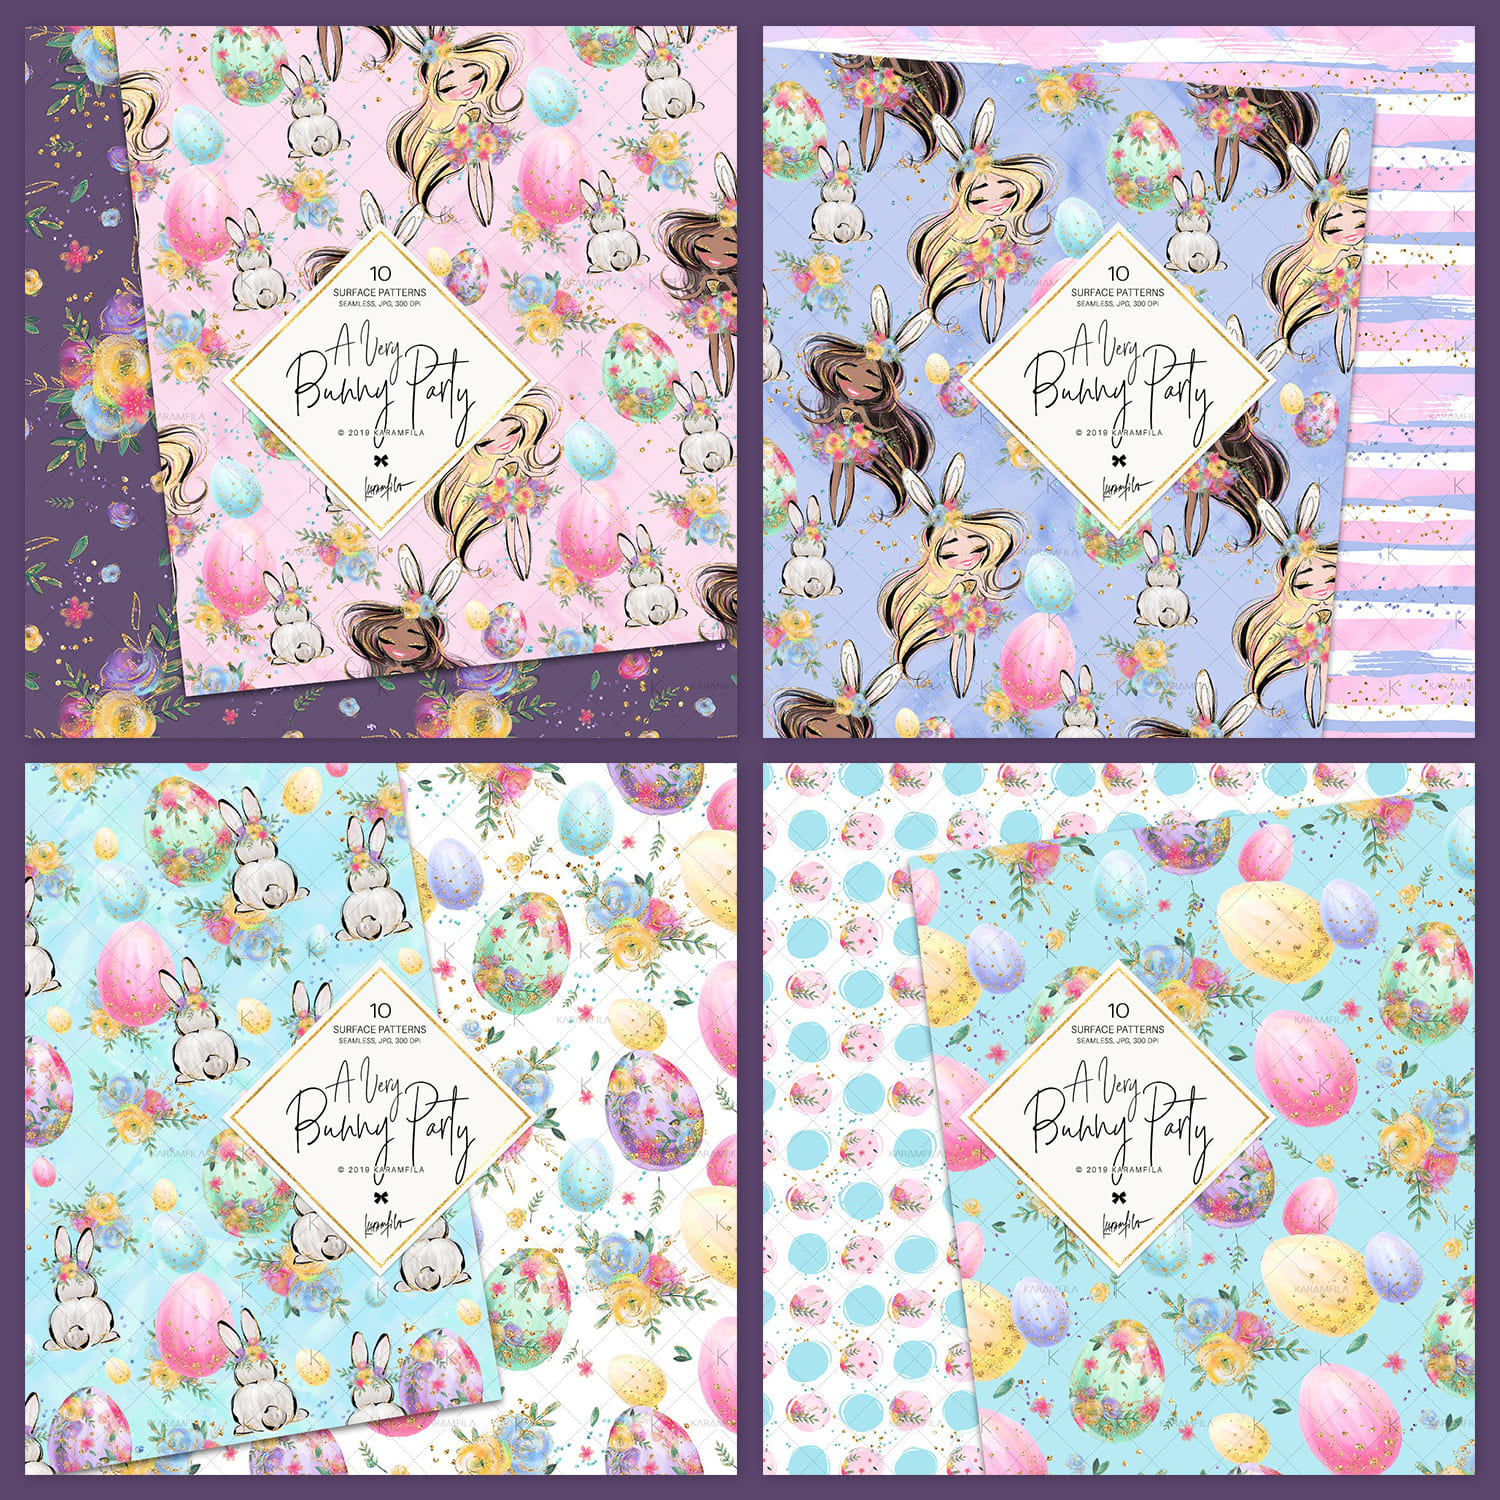 Easter Eggs Bunny Fairy Patterns cover.